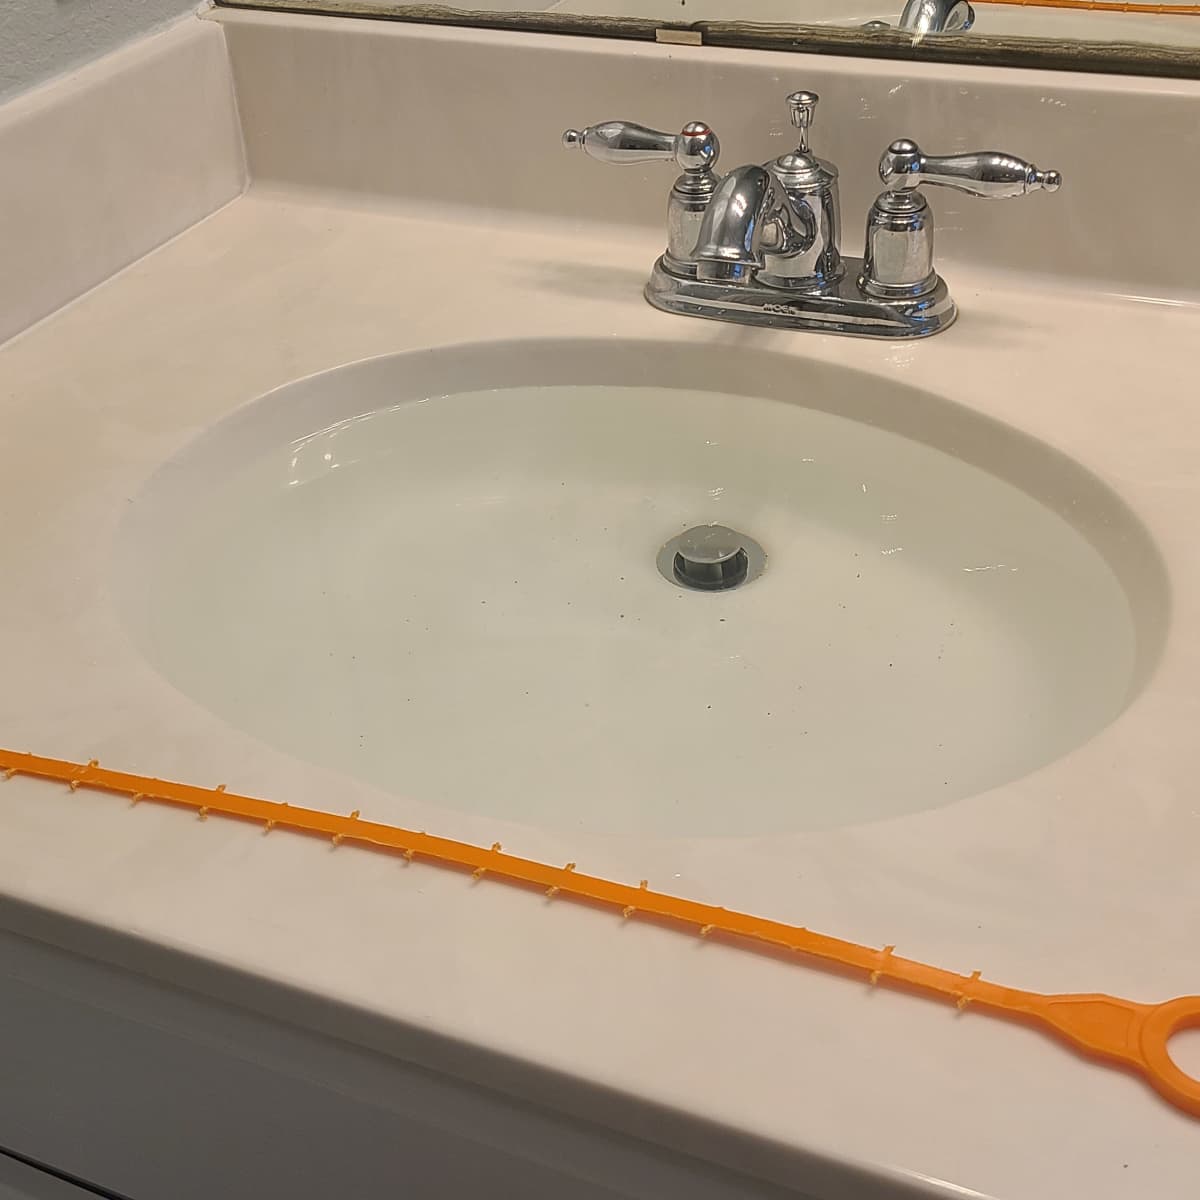 How to Clean and Unclog a Bathroom Sink Drain